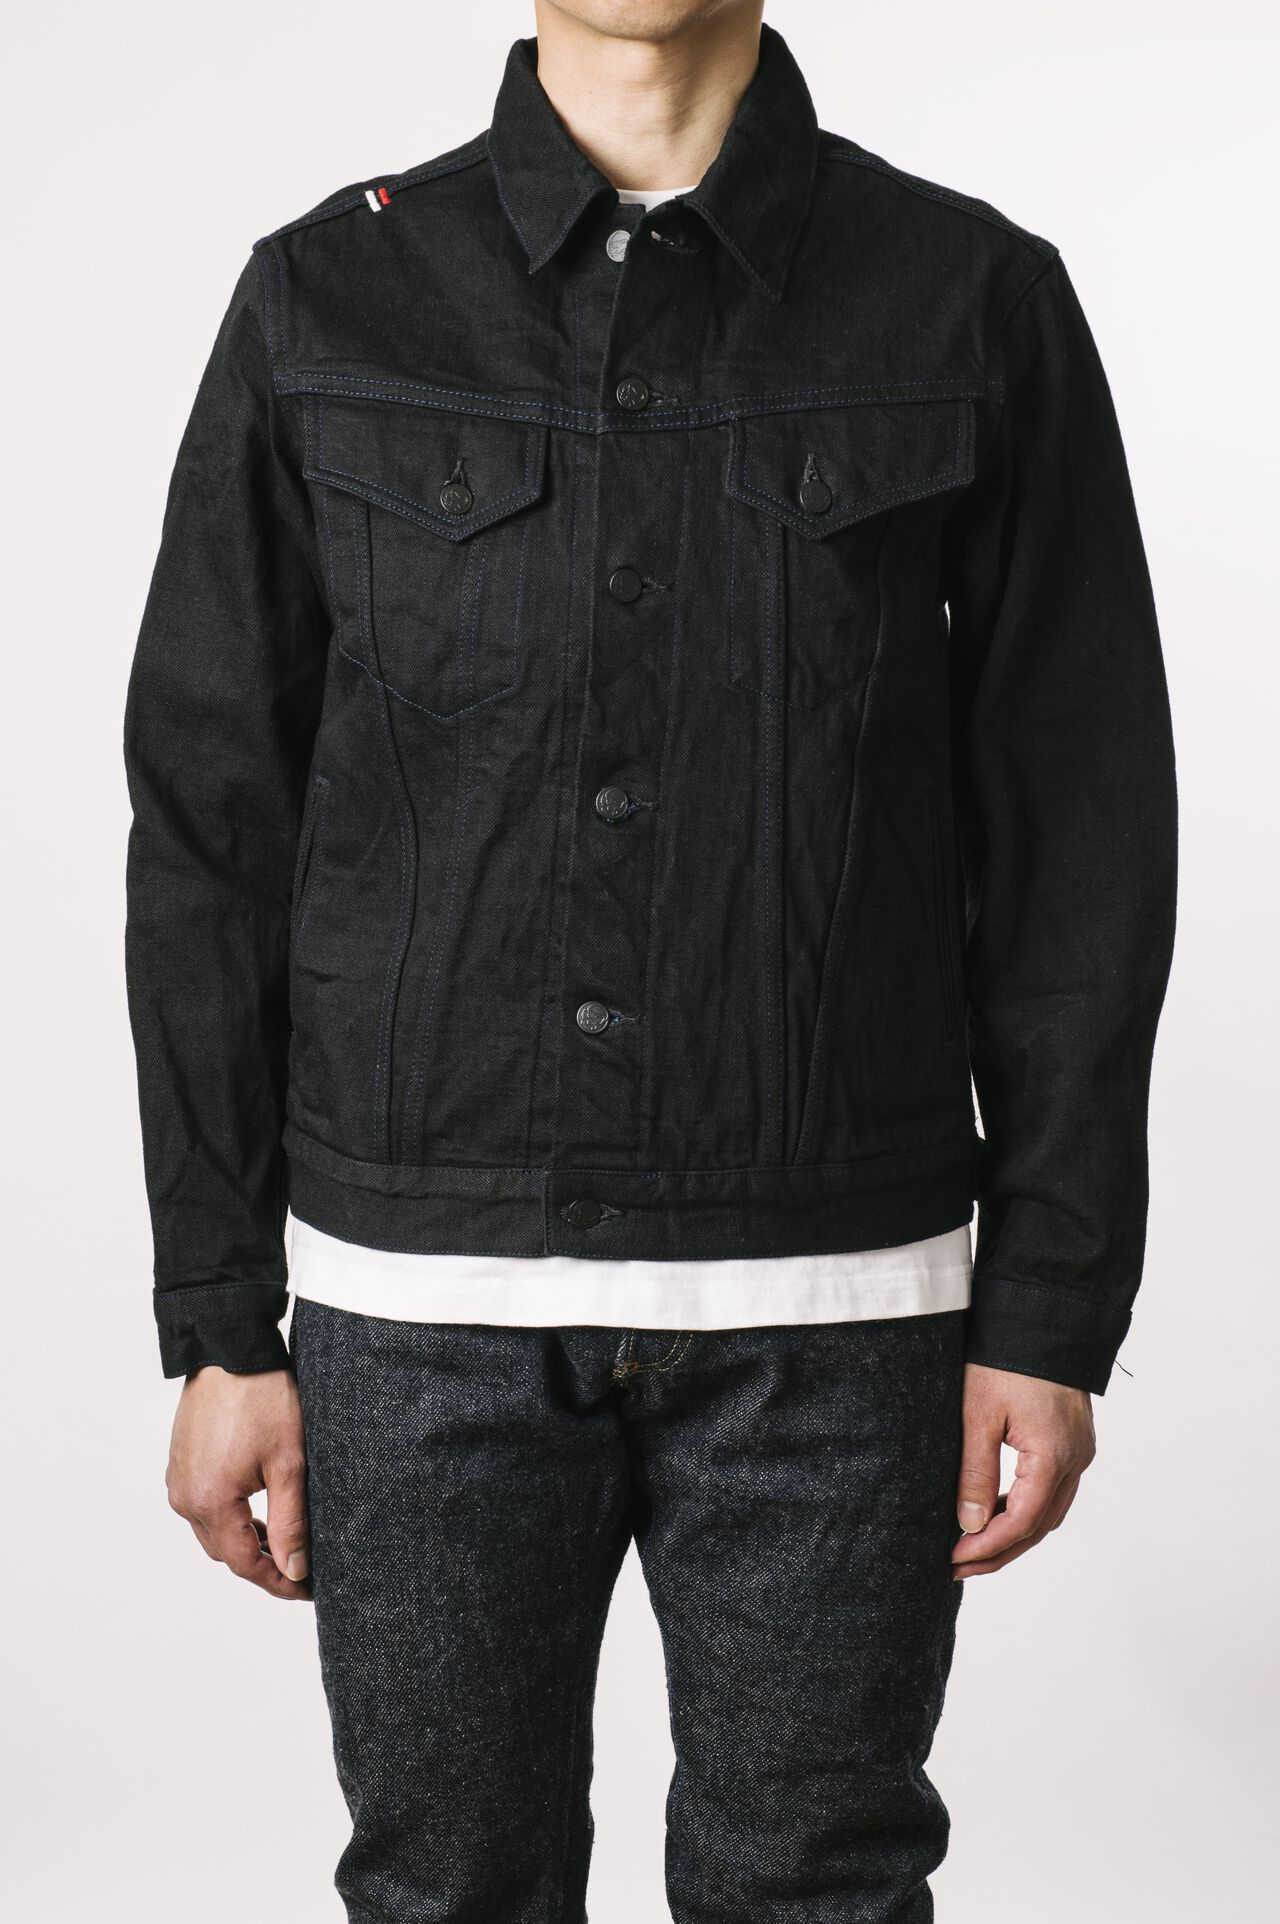 BKJKT3 15.5oz 3rd type Jacket with handwarmers-40-One Wash,, large image number 0